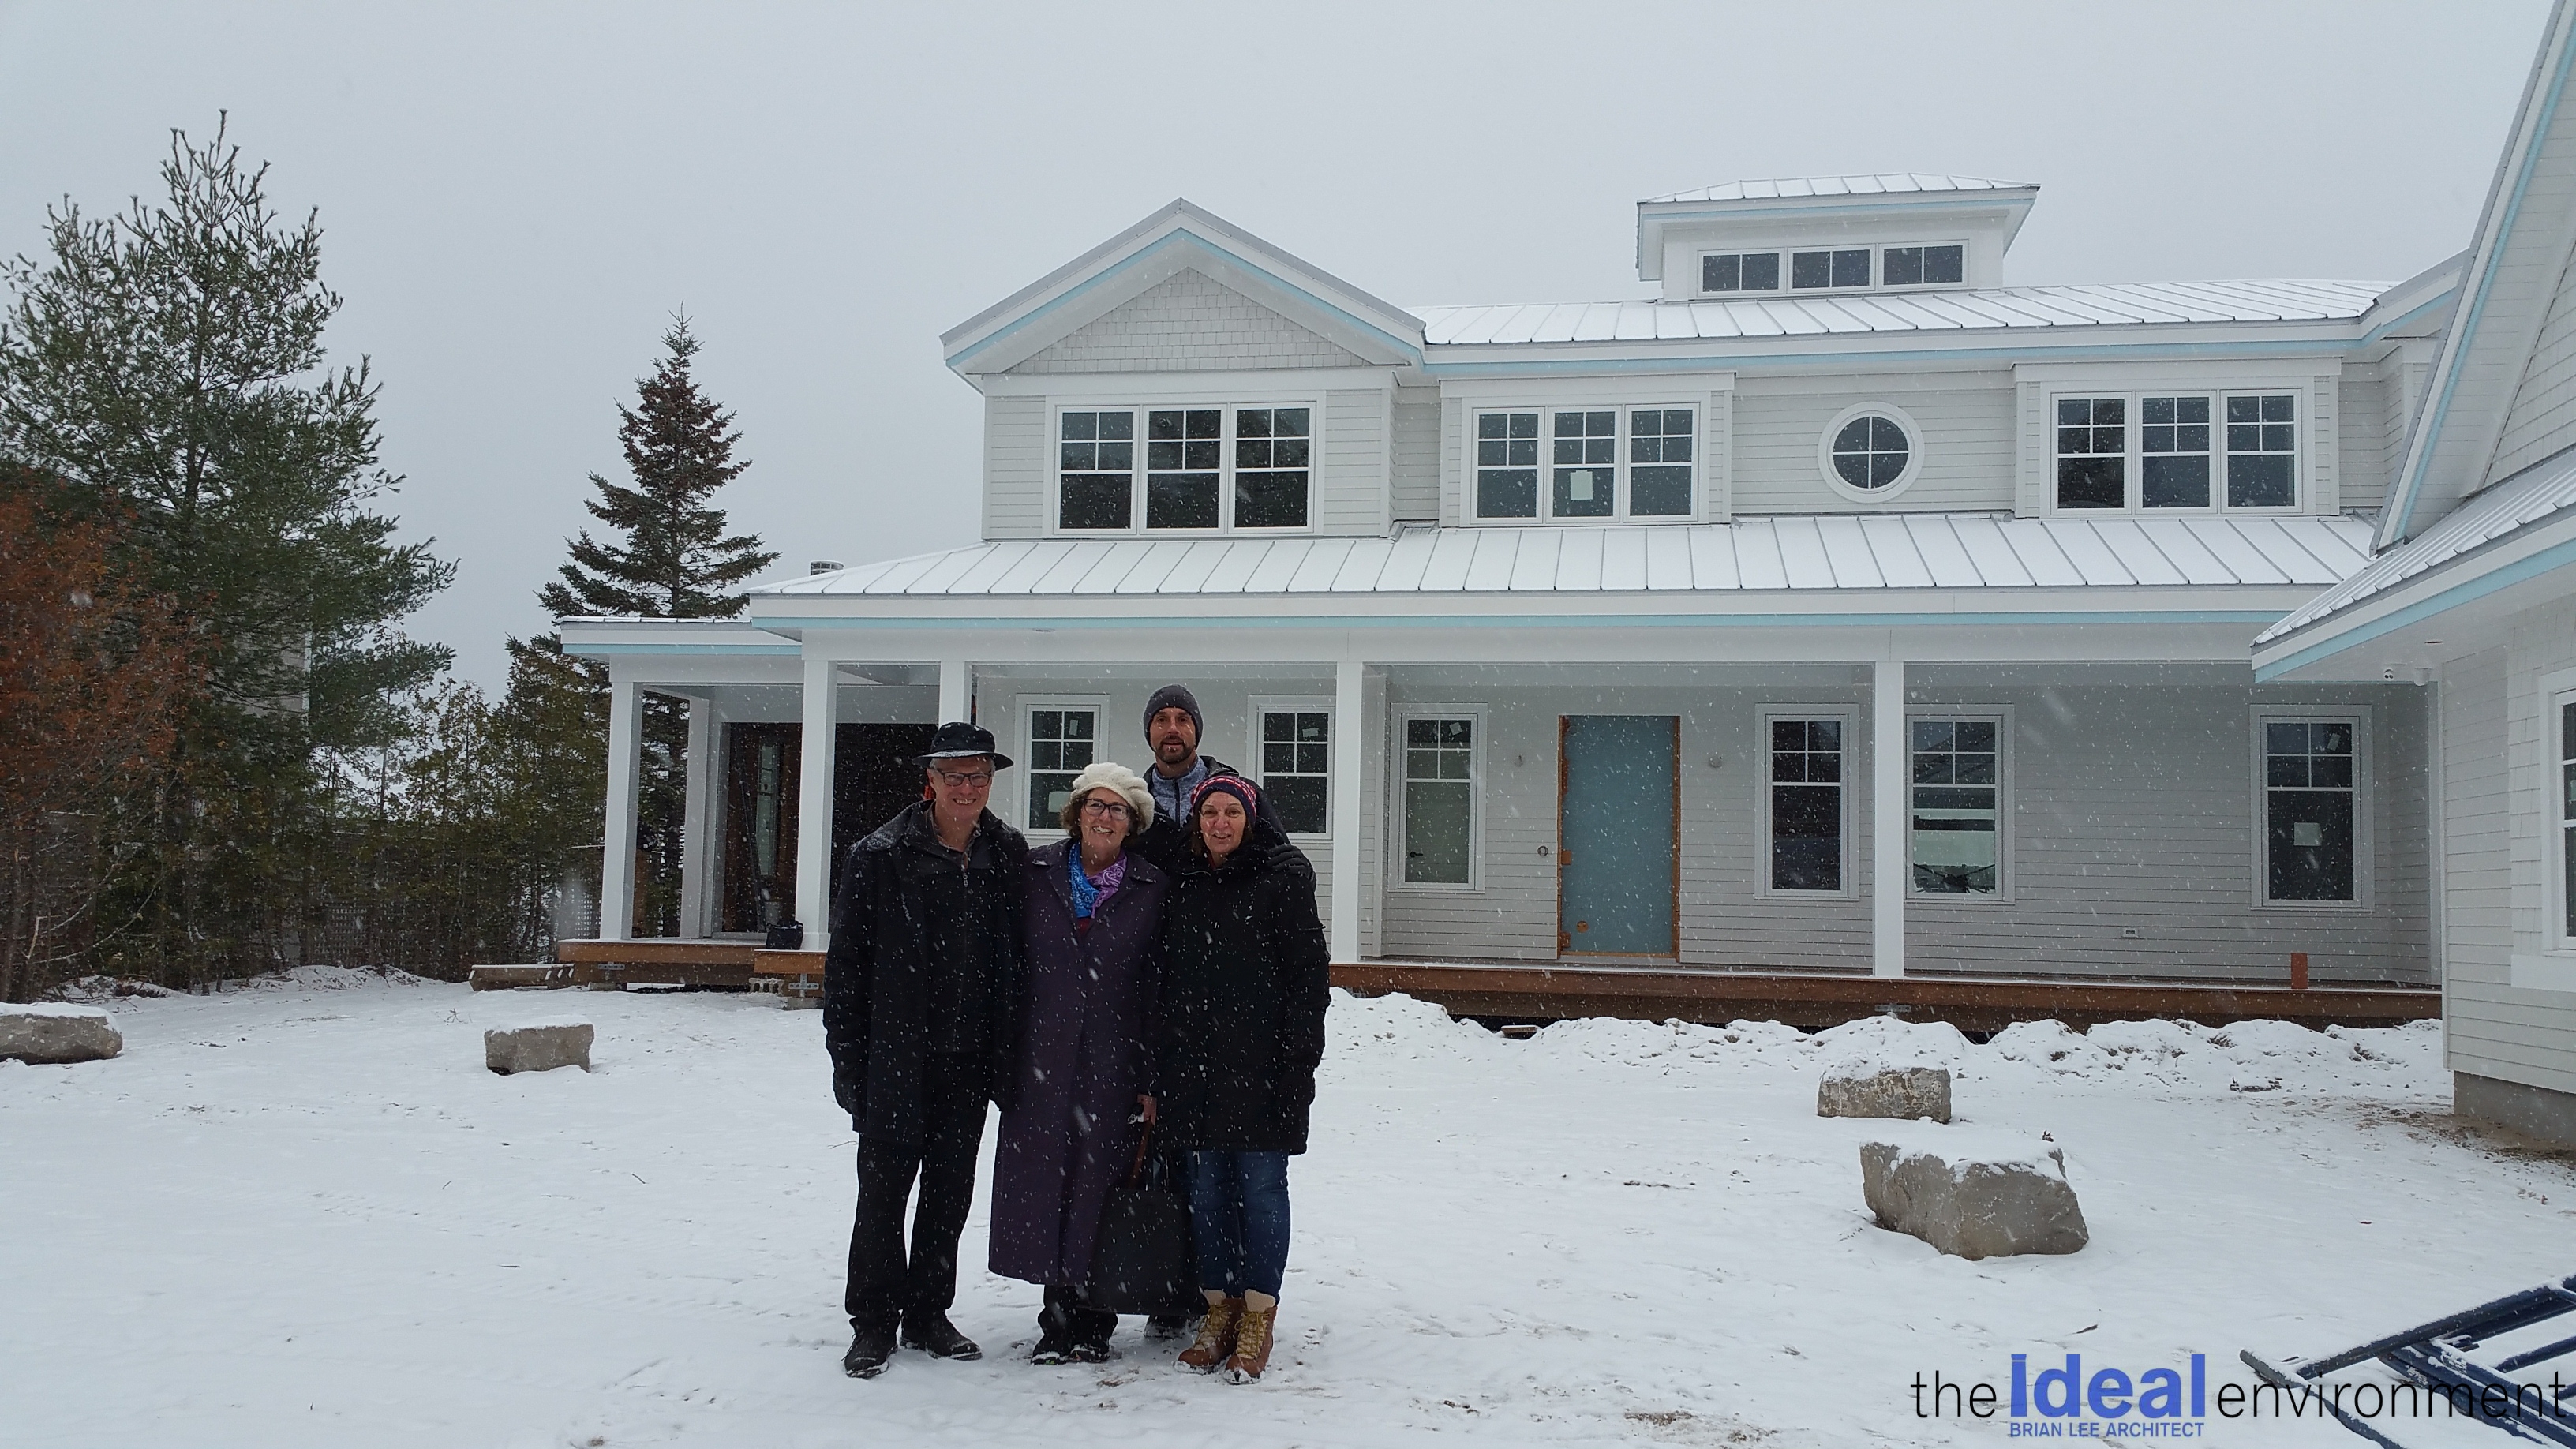 Construction Progress - Brian Lee and Marilyn Lake with Clients